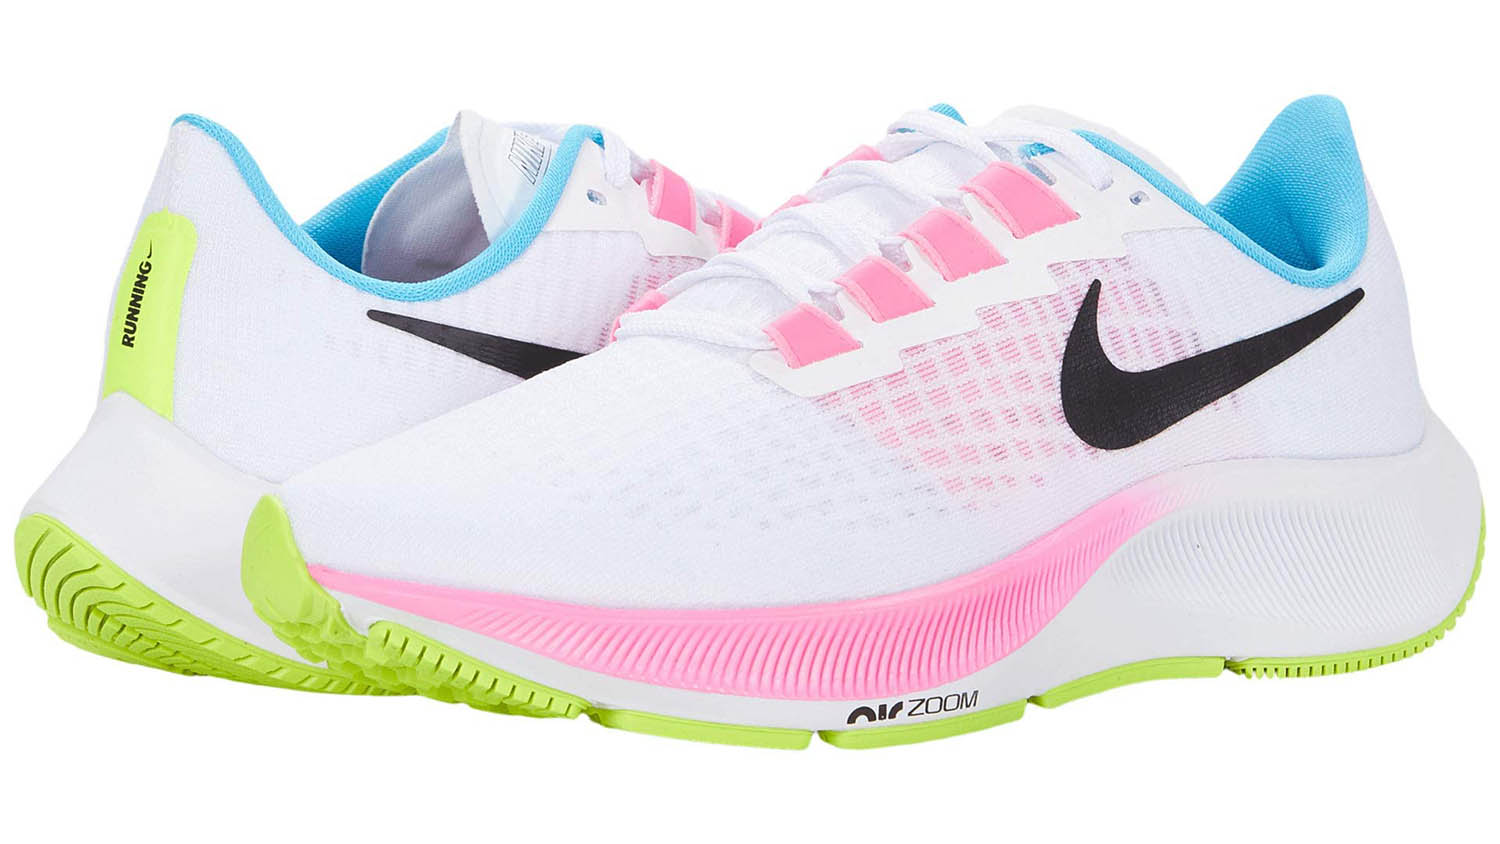 Best Running Shoes for Women Over 50 